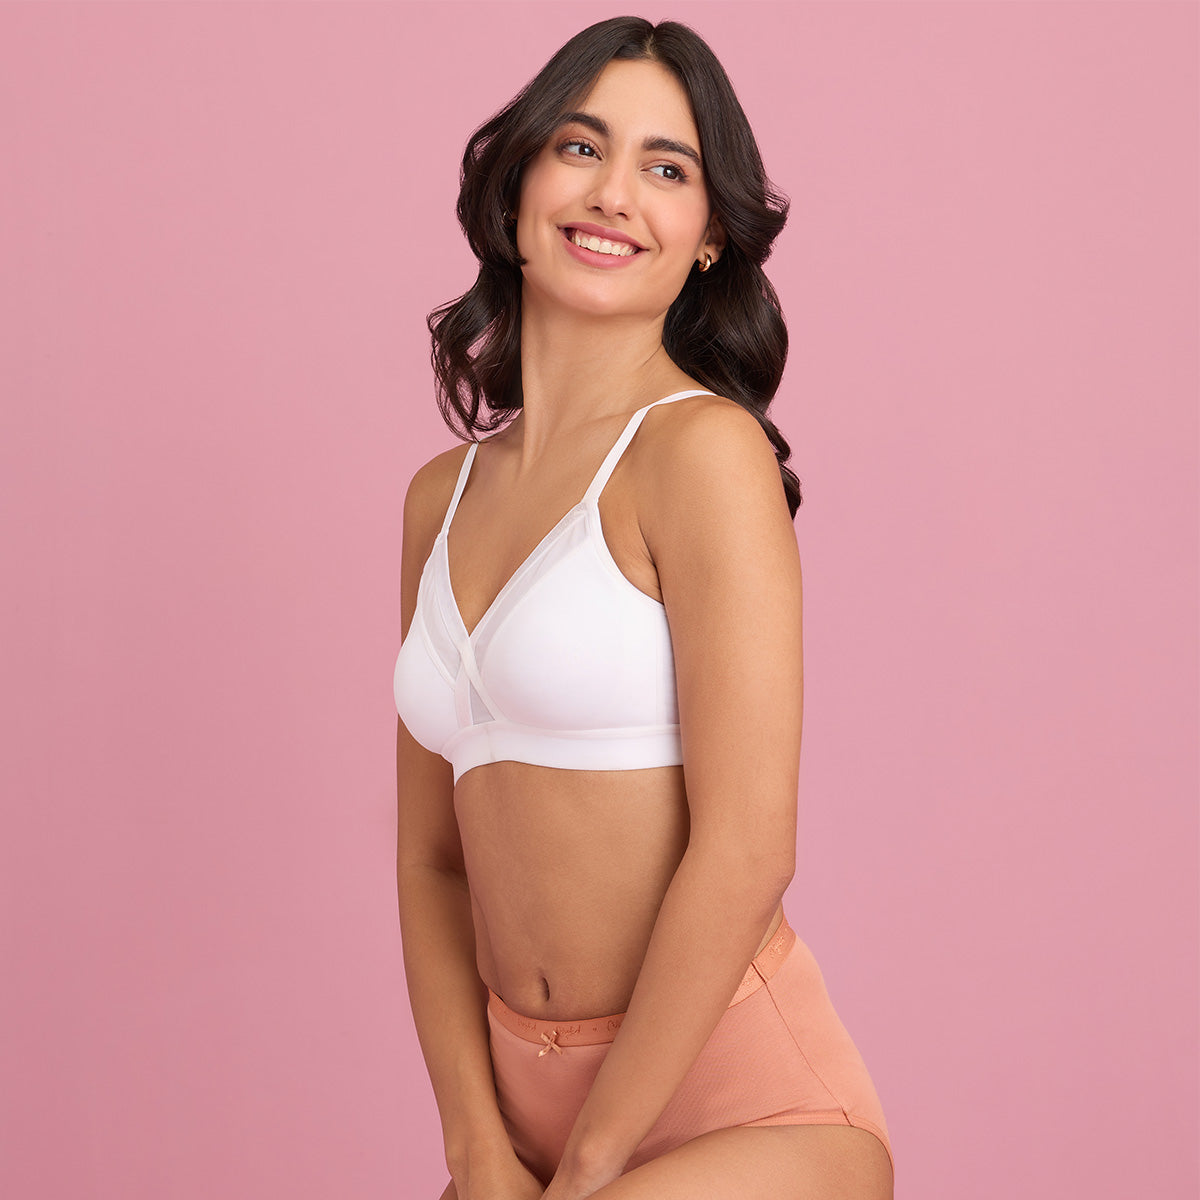 Nykd By Nykaa X-Frame Cotton Support Bra-White NYB191